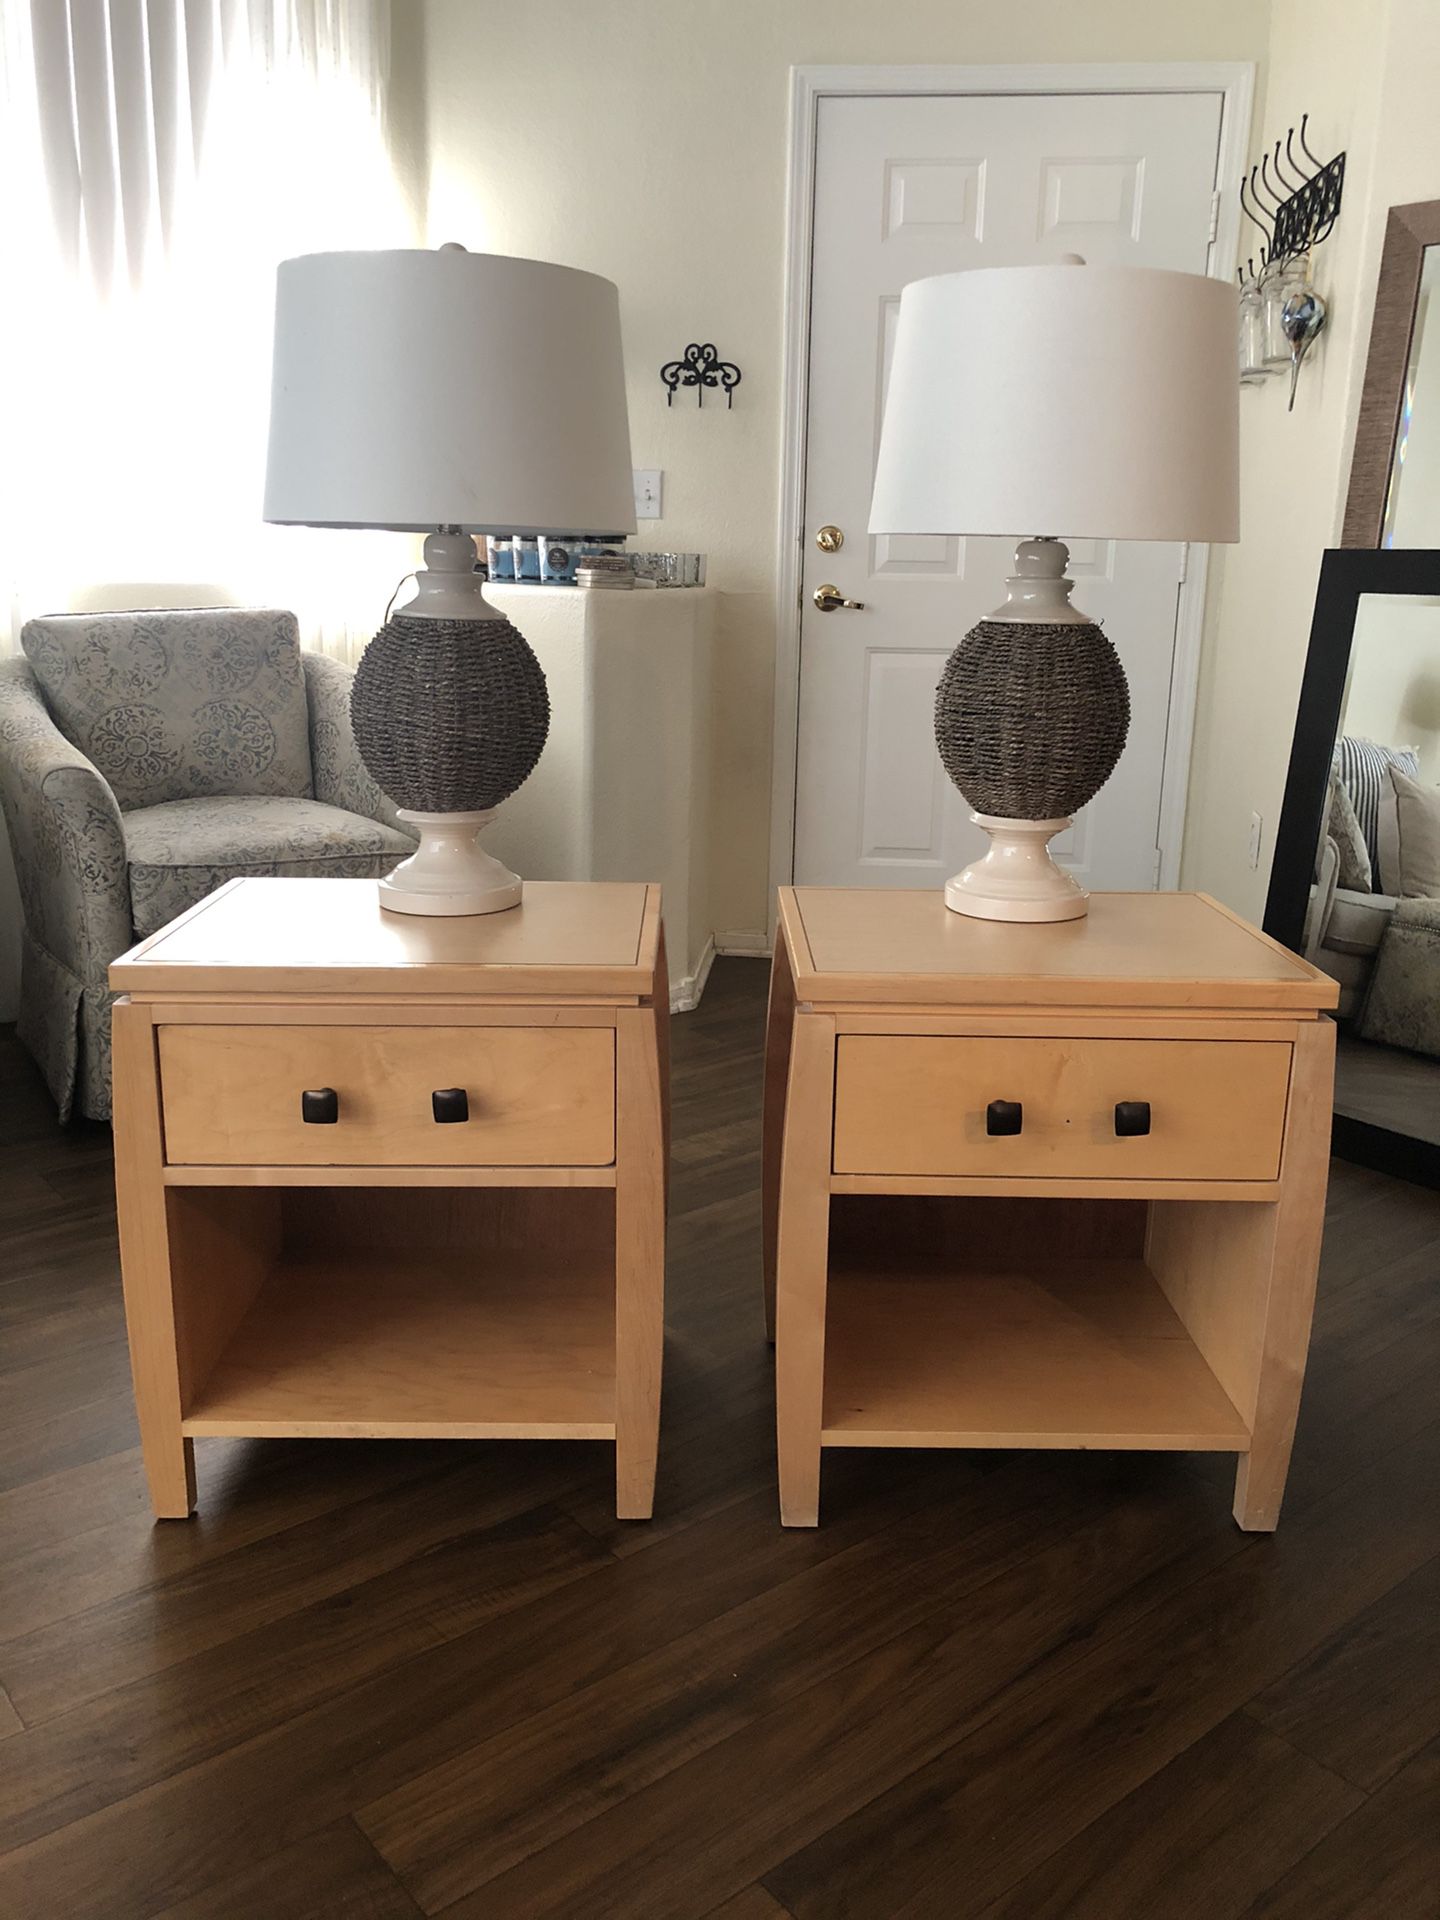 Two nightstands $20 for the set!